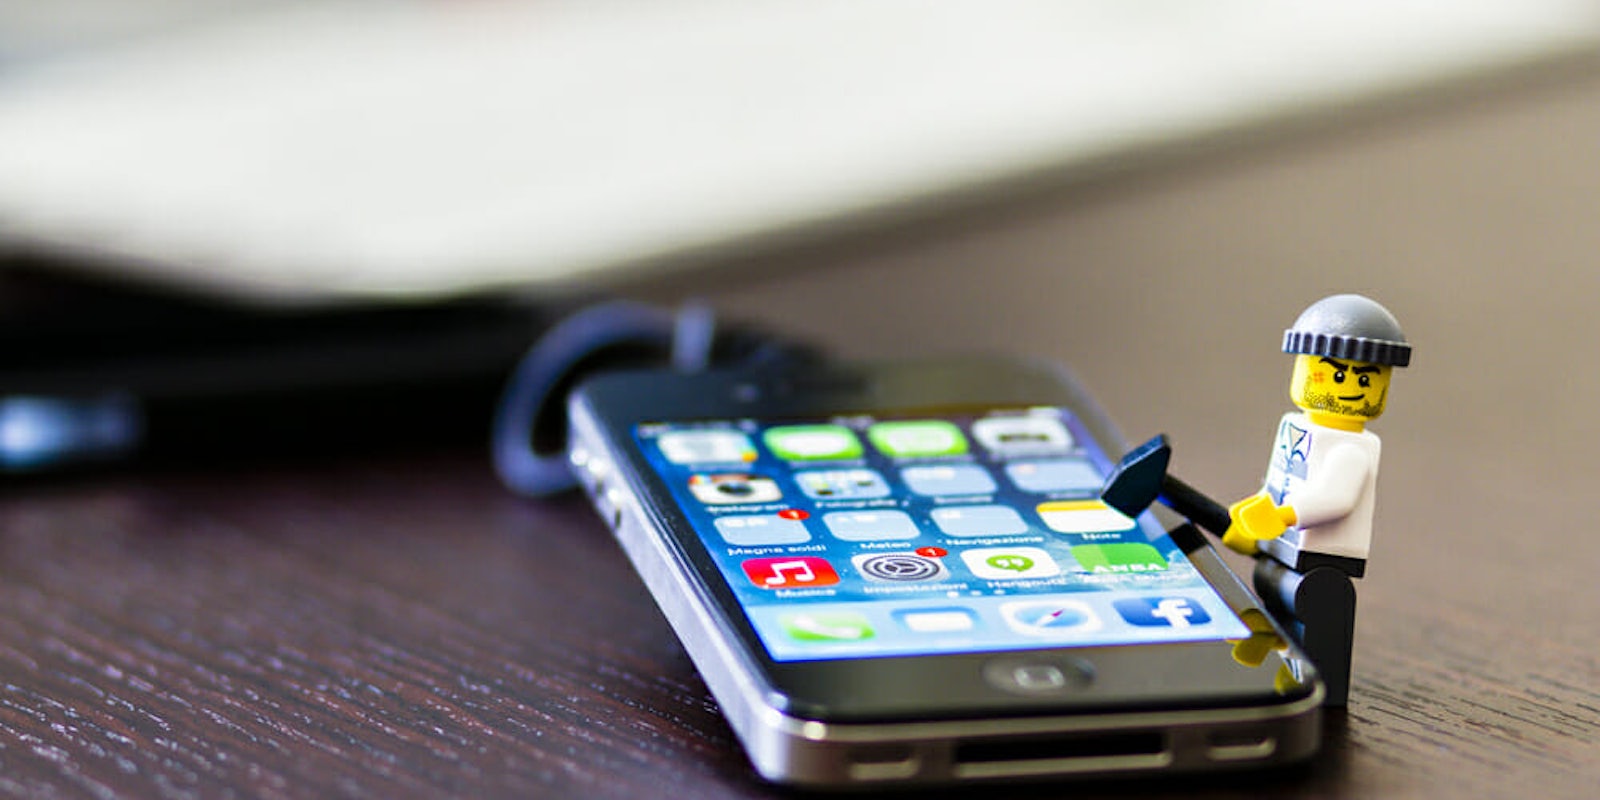 apple iphone security flaw bug